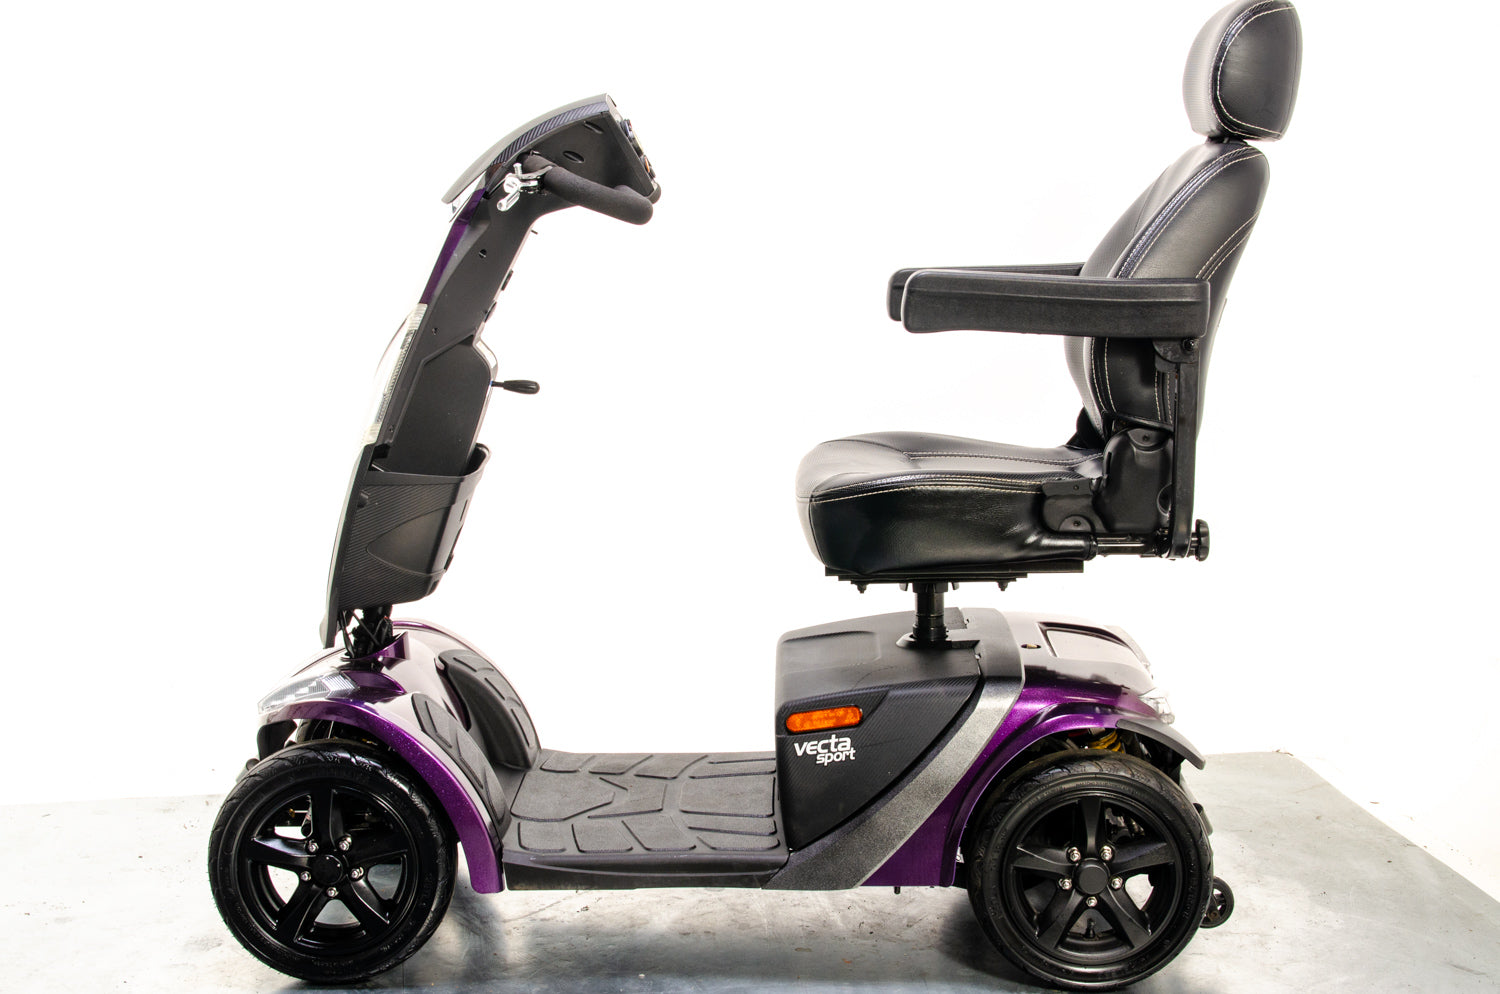 Rascal Vecta Sport Compact Used Electric Mobility Scooter 8mph Max Grip Suspension All-Terrain Road Legal Purple Sparkle 13317